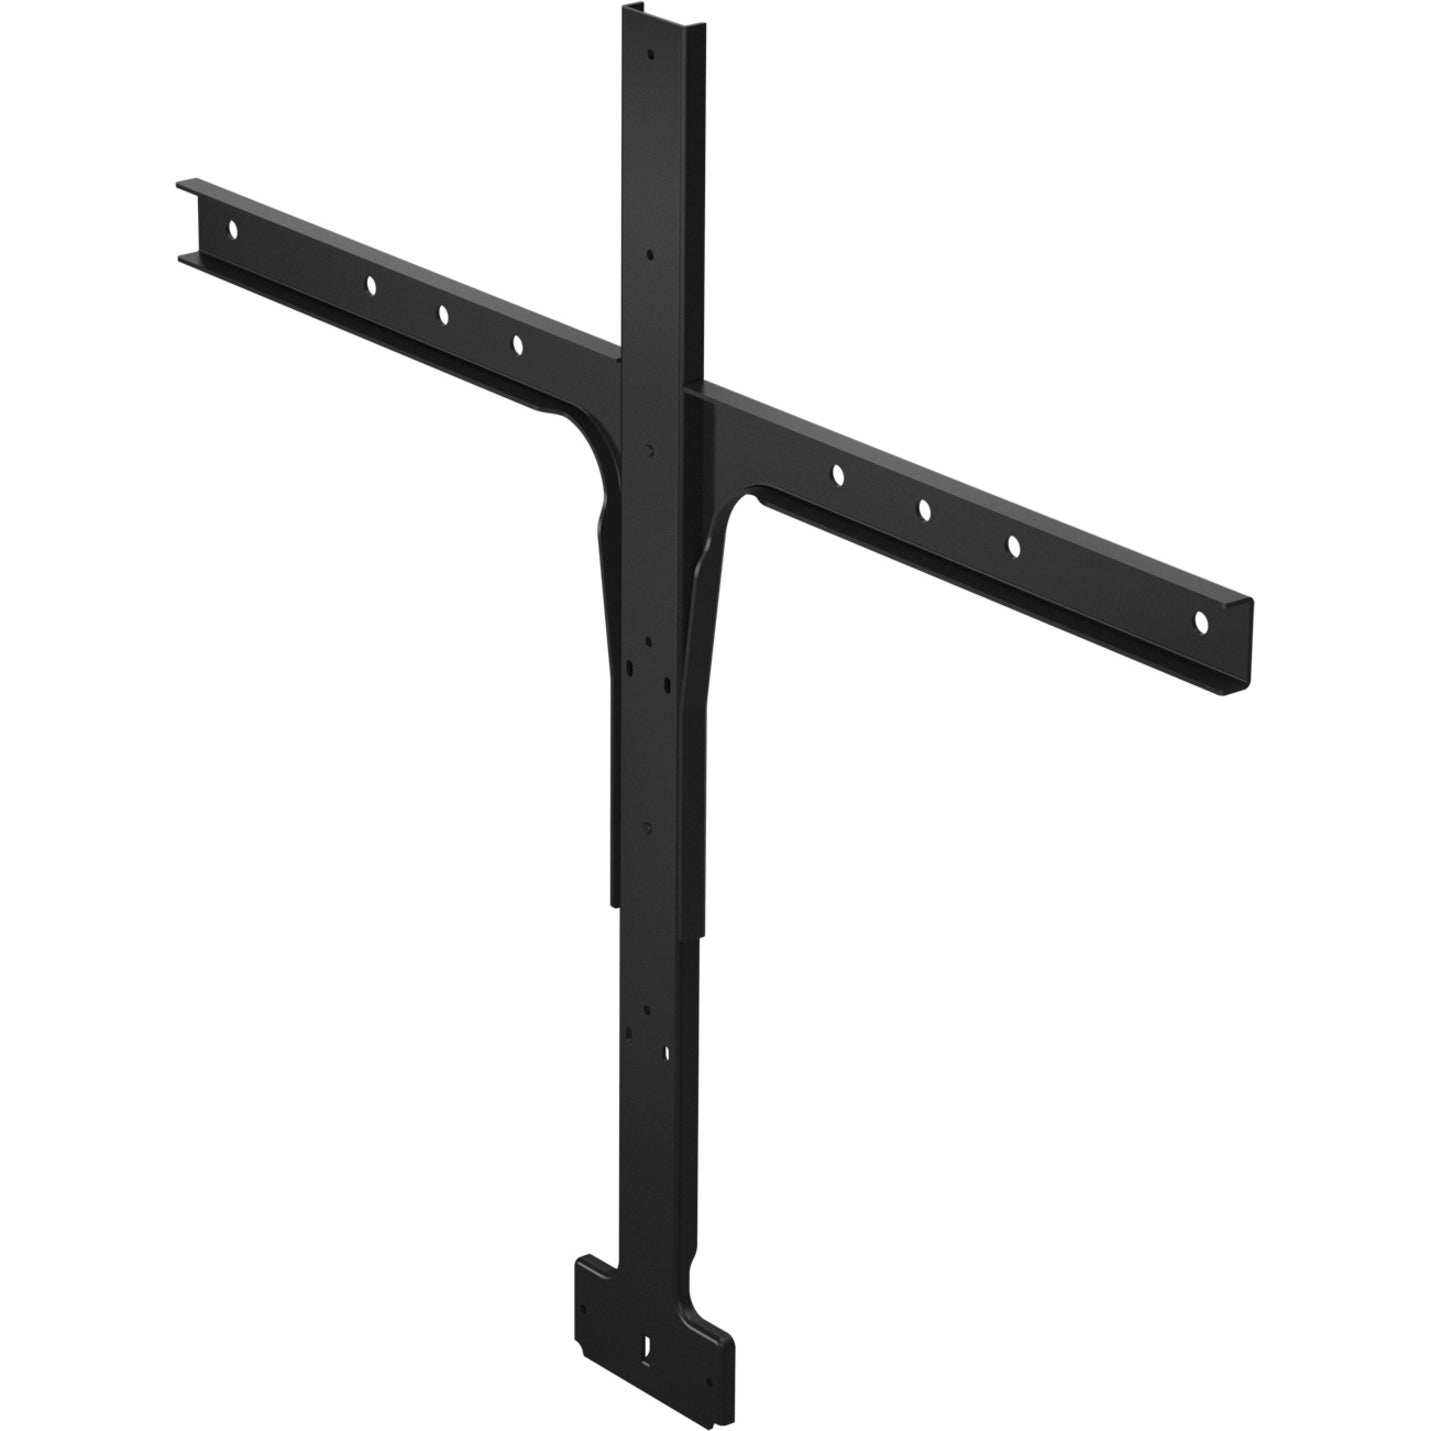 Jabra 14207-72 PanaCast 50 Screen Mount, Mounting Adapter for TV and Video Conferencing System